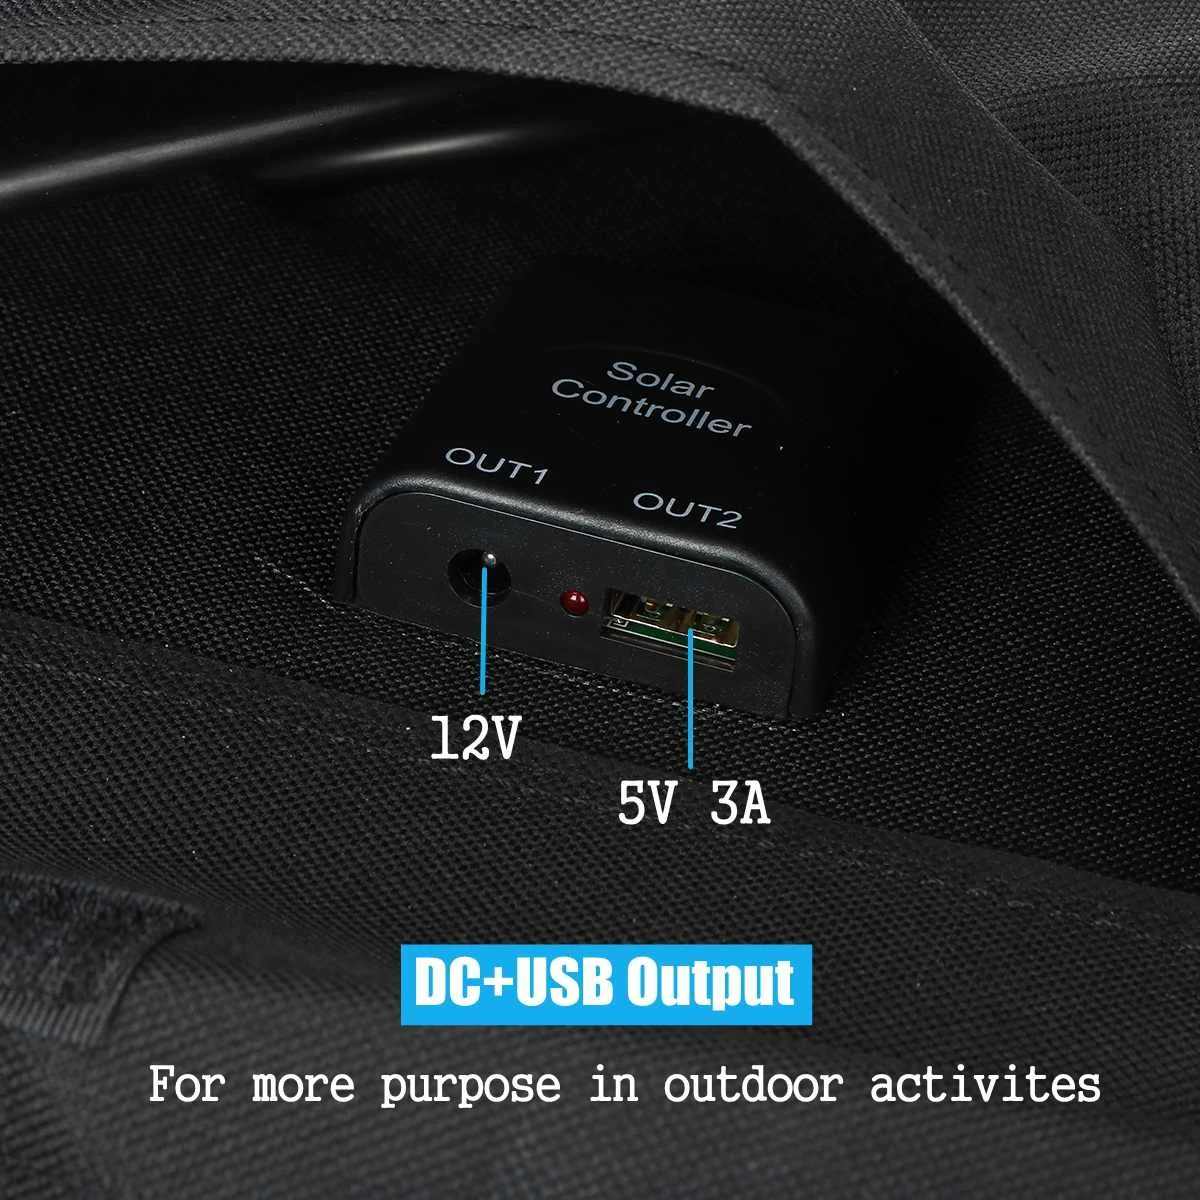 400w solar panel 18v dc cable usb port outdoor portable battery charger for phone car yacht rv lights charging with controller free global shipping